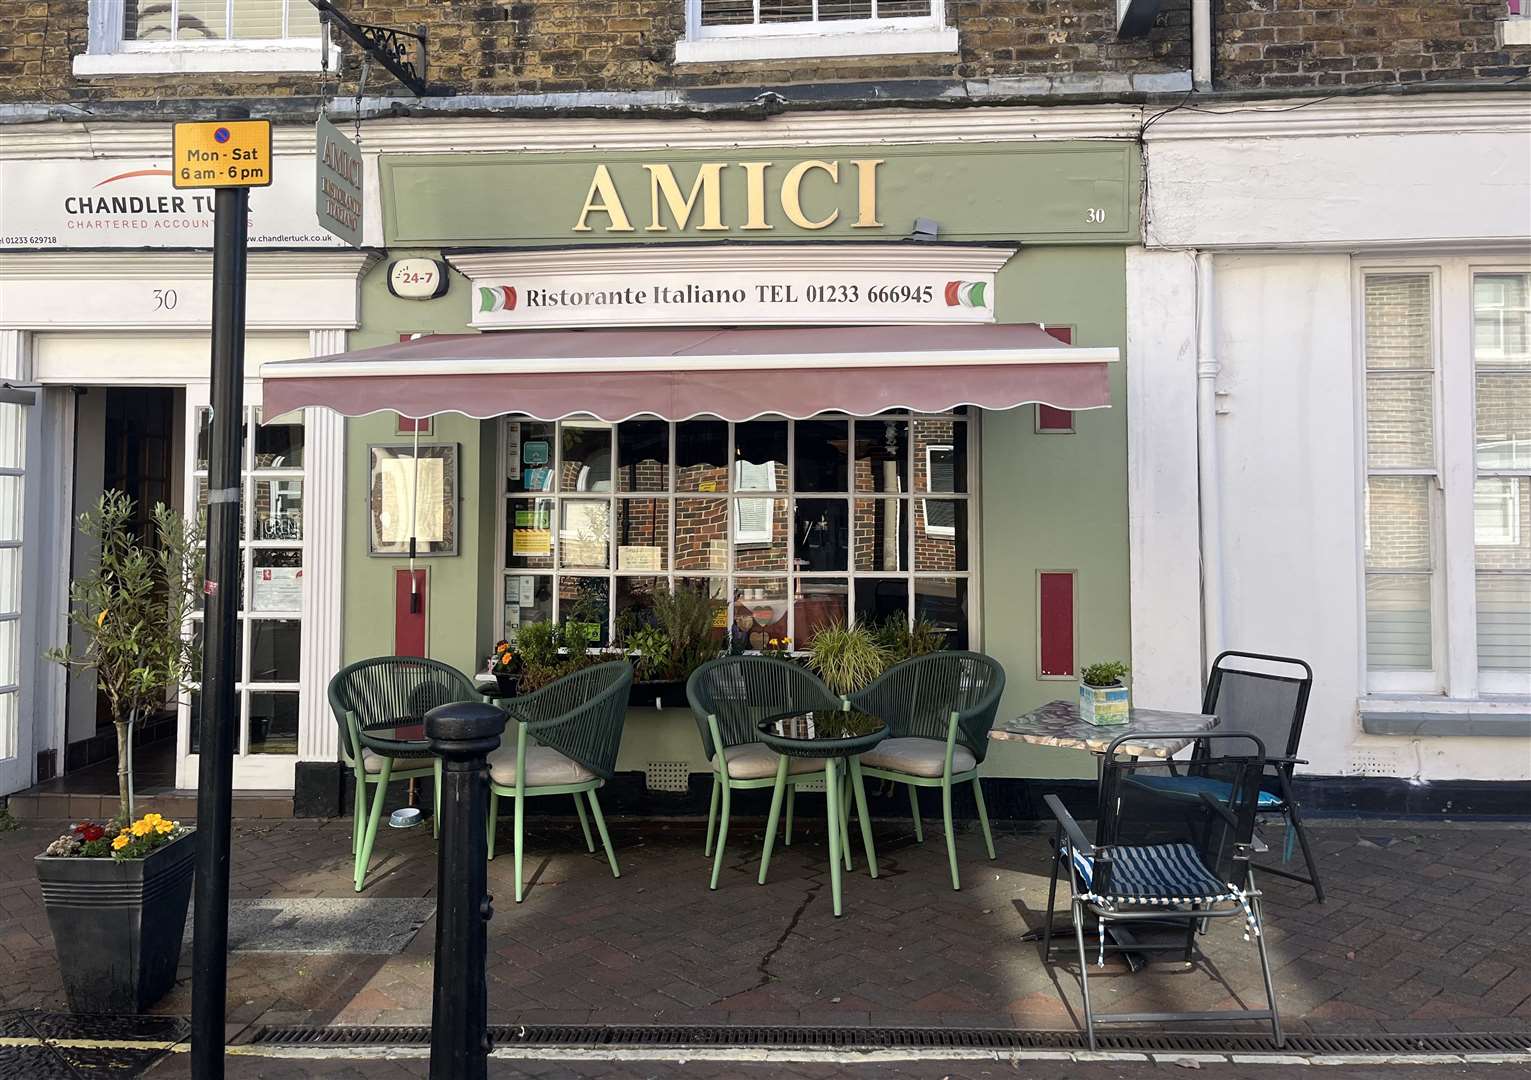 The Amici restaurant is on the market eight years after opening